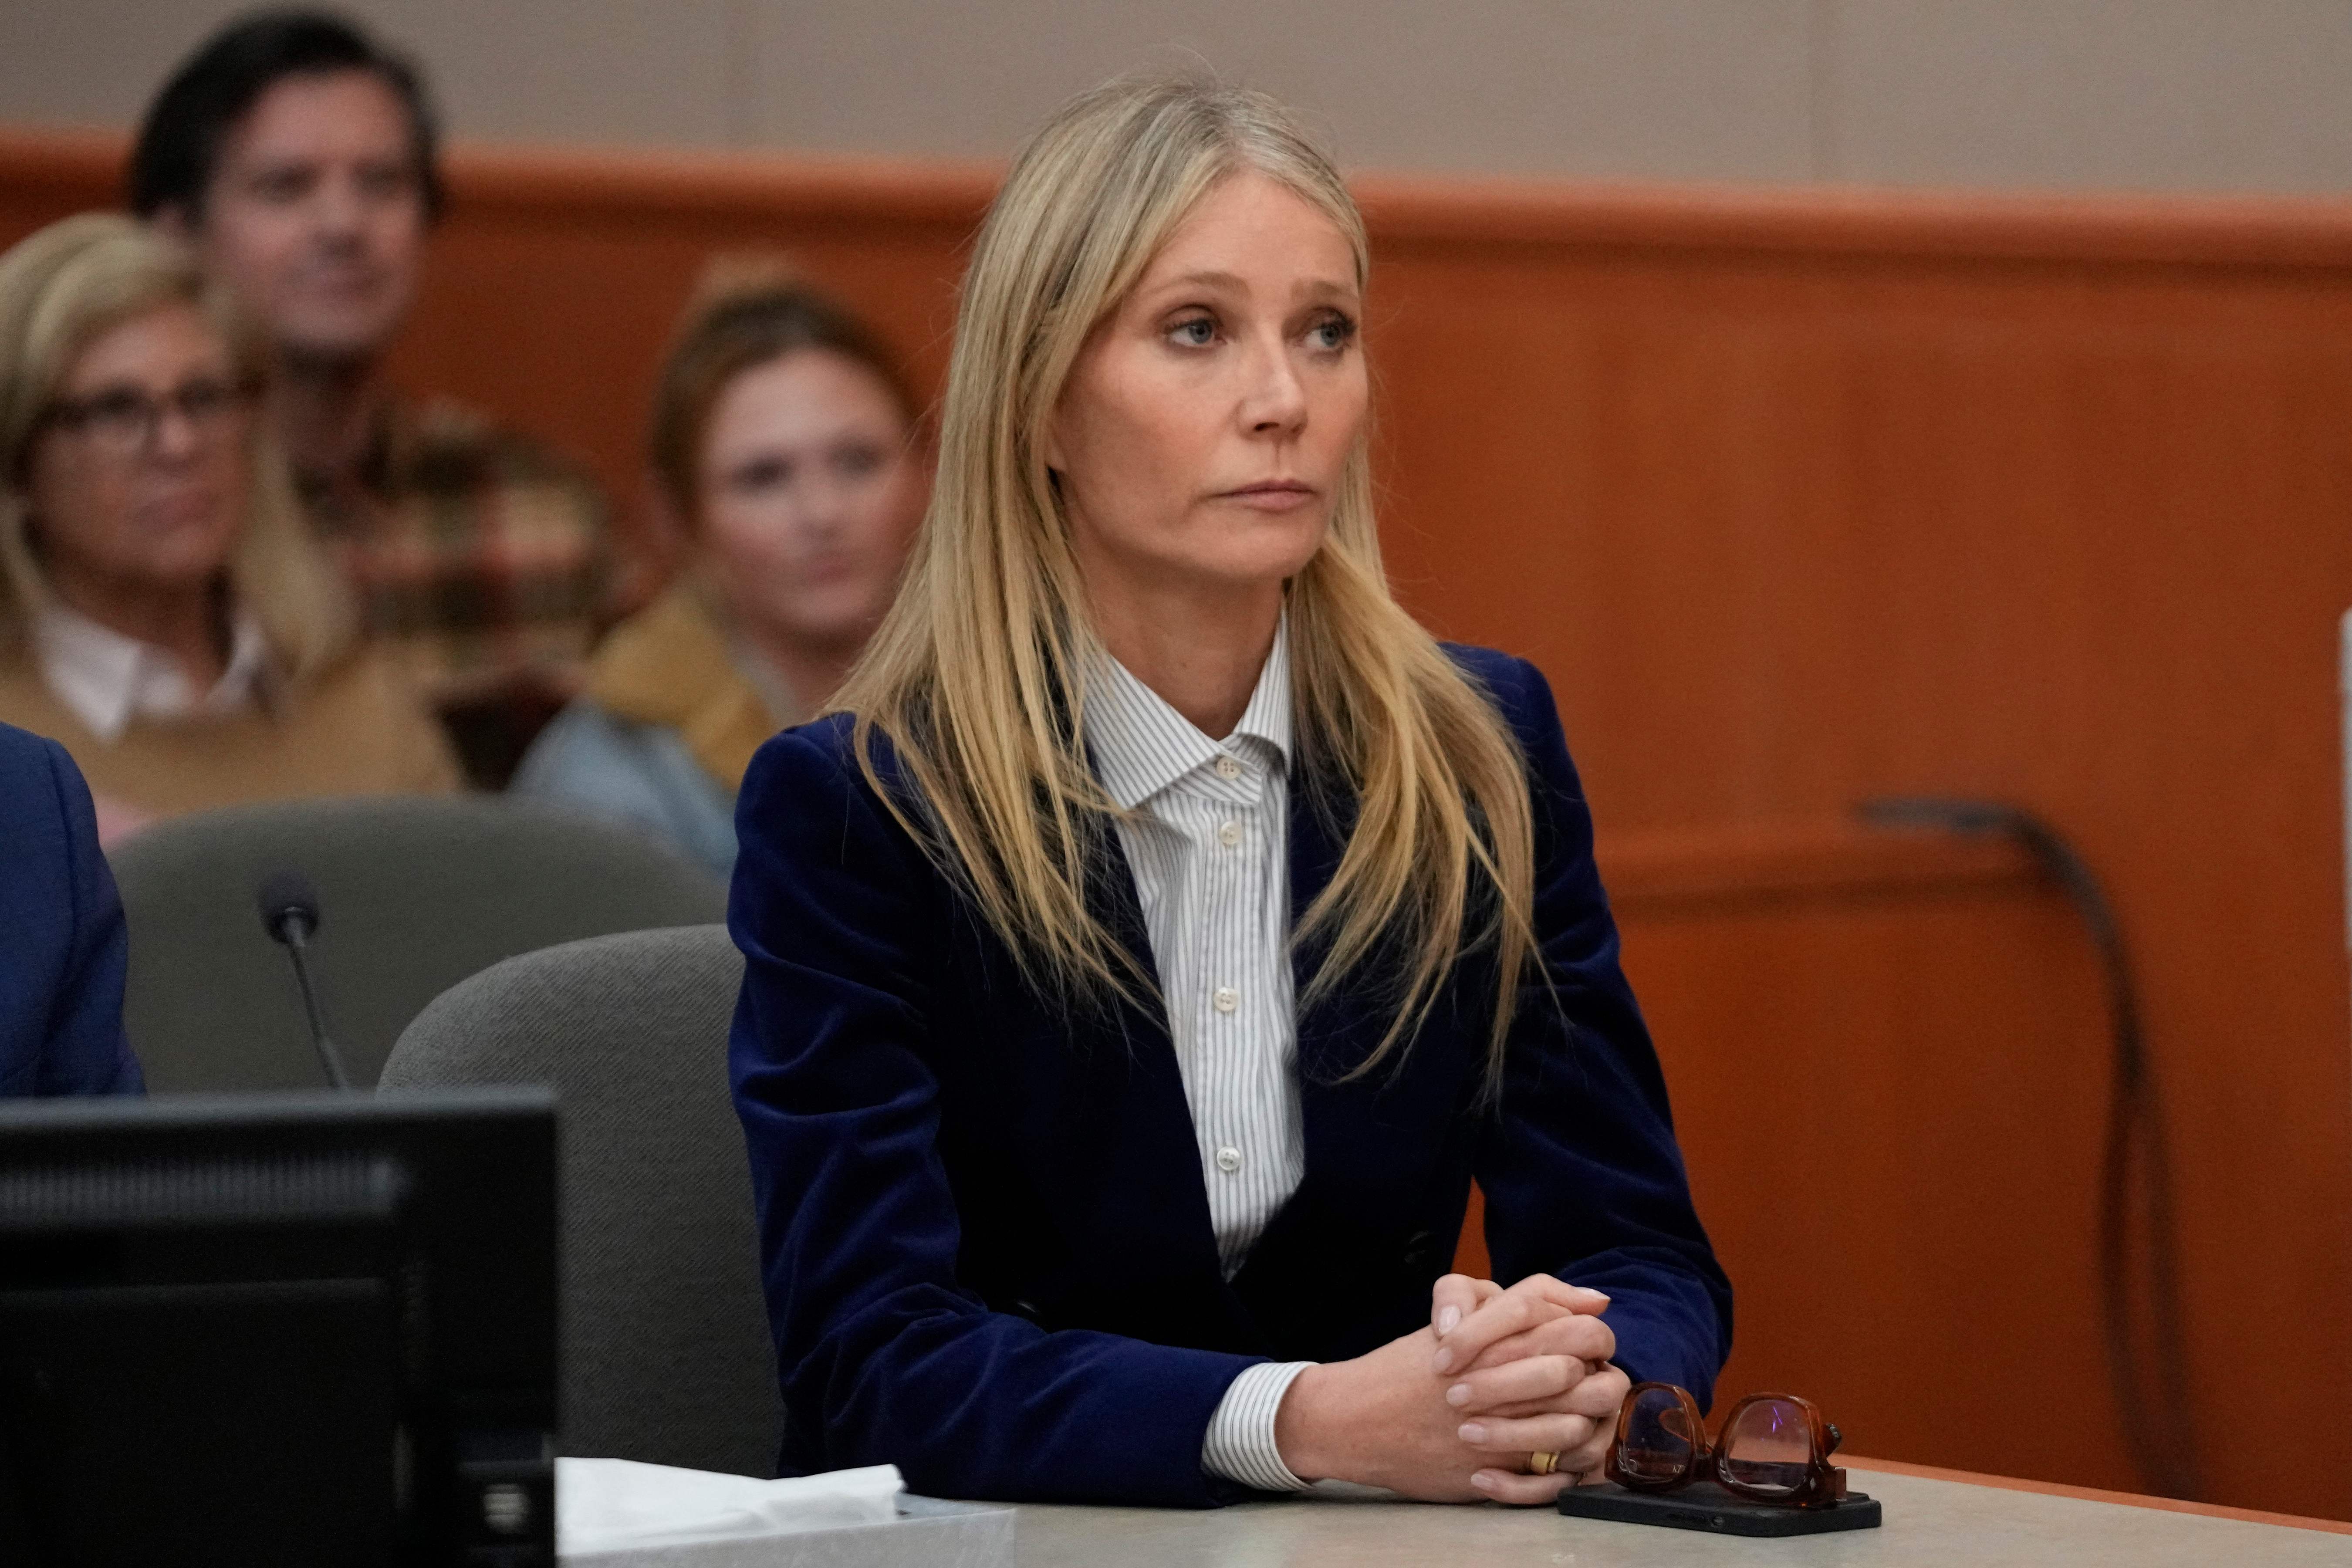 US actress Gwyneth Paltrow reacts to the verdict in the trial over her 2016 ski collision with 76-year-old Terry Sanderson